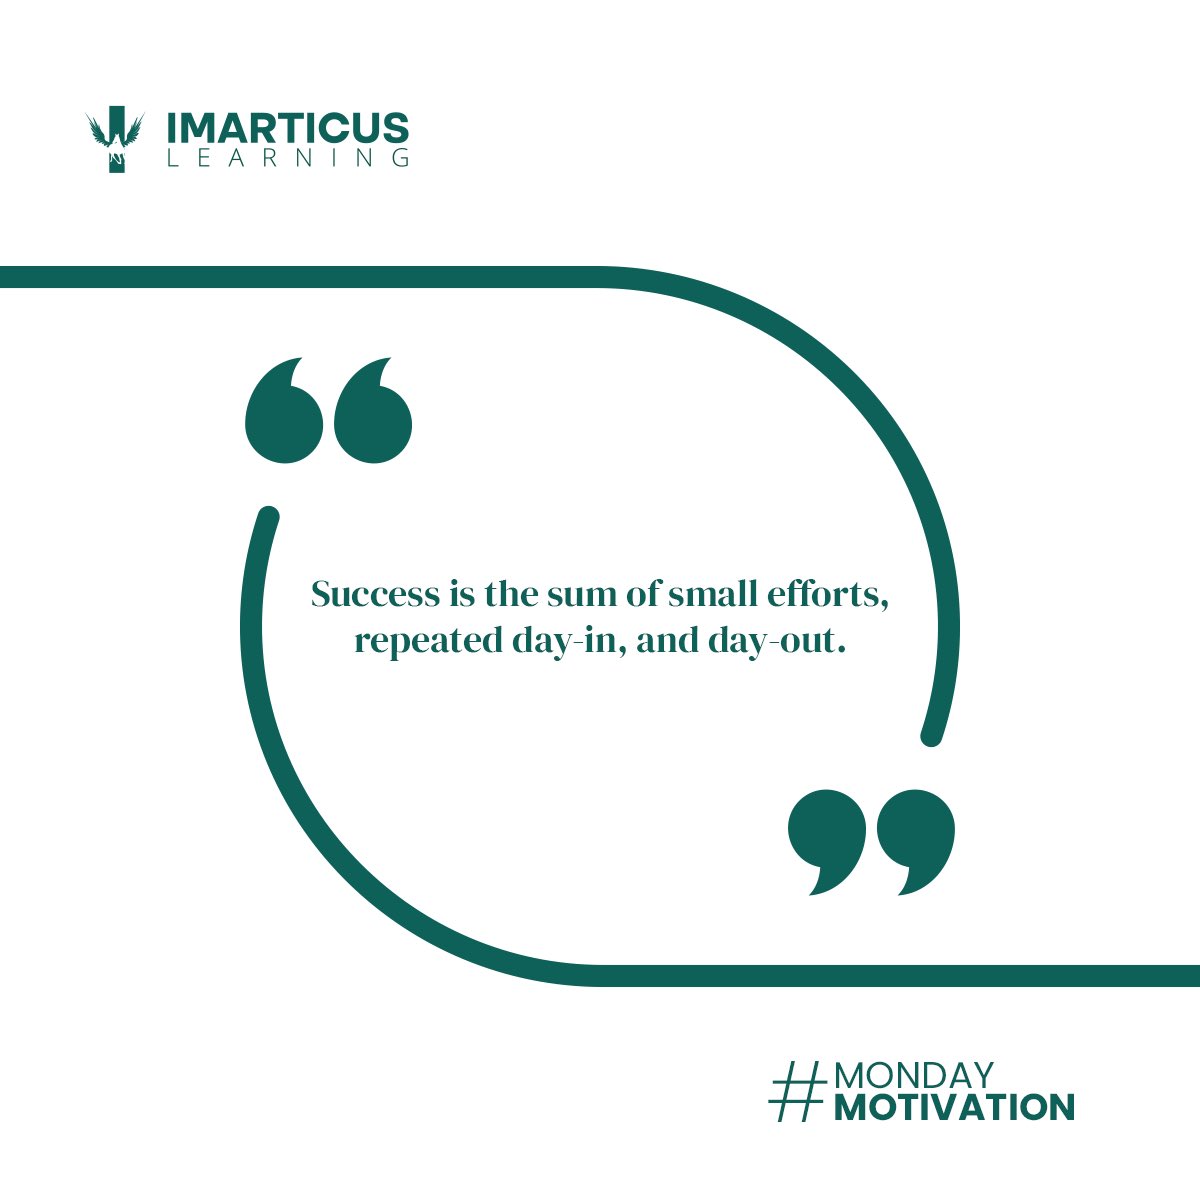 Success is built on the foundation of small, consistent efforts made day after day. Each step taken, no matter how small, contributes to the journey of achieving your goals and dreams. #MondayMotivation